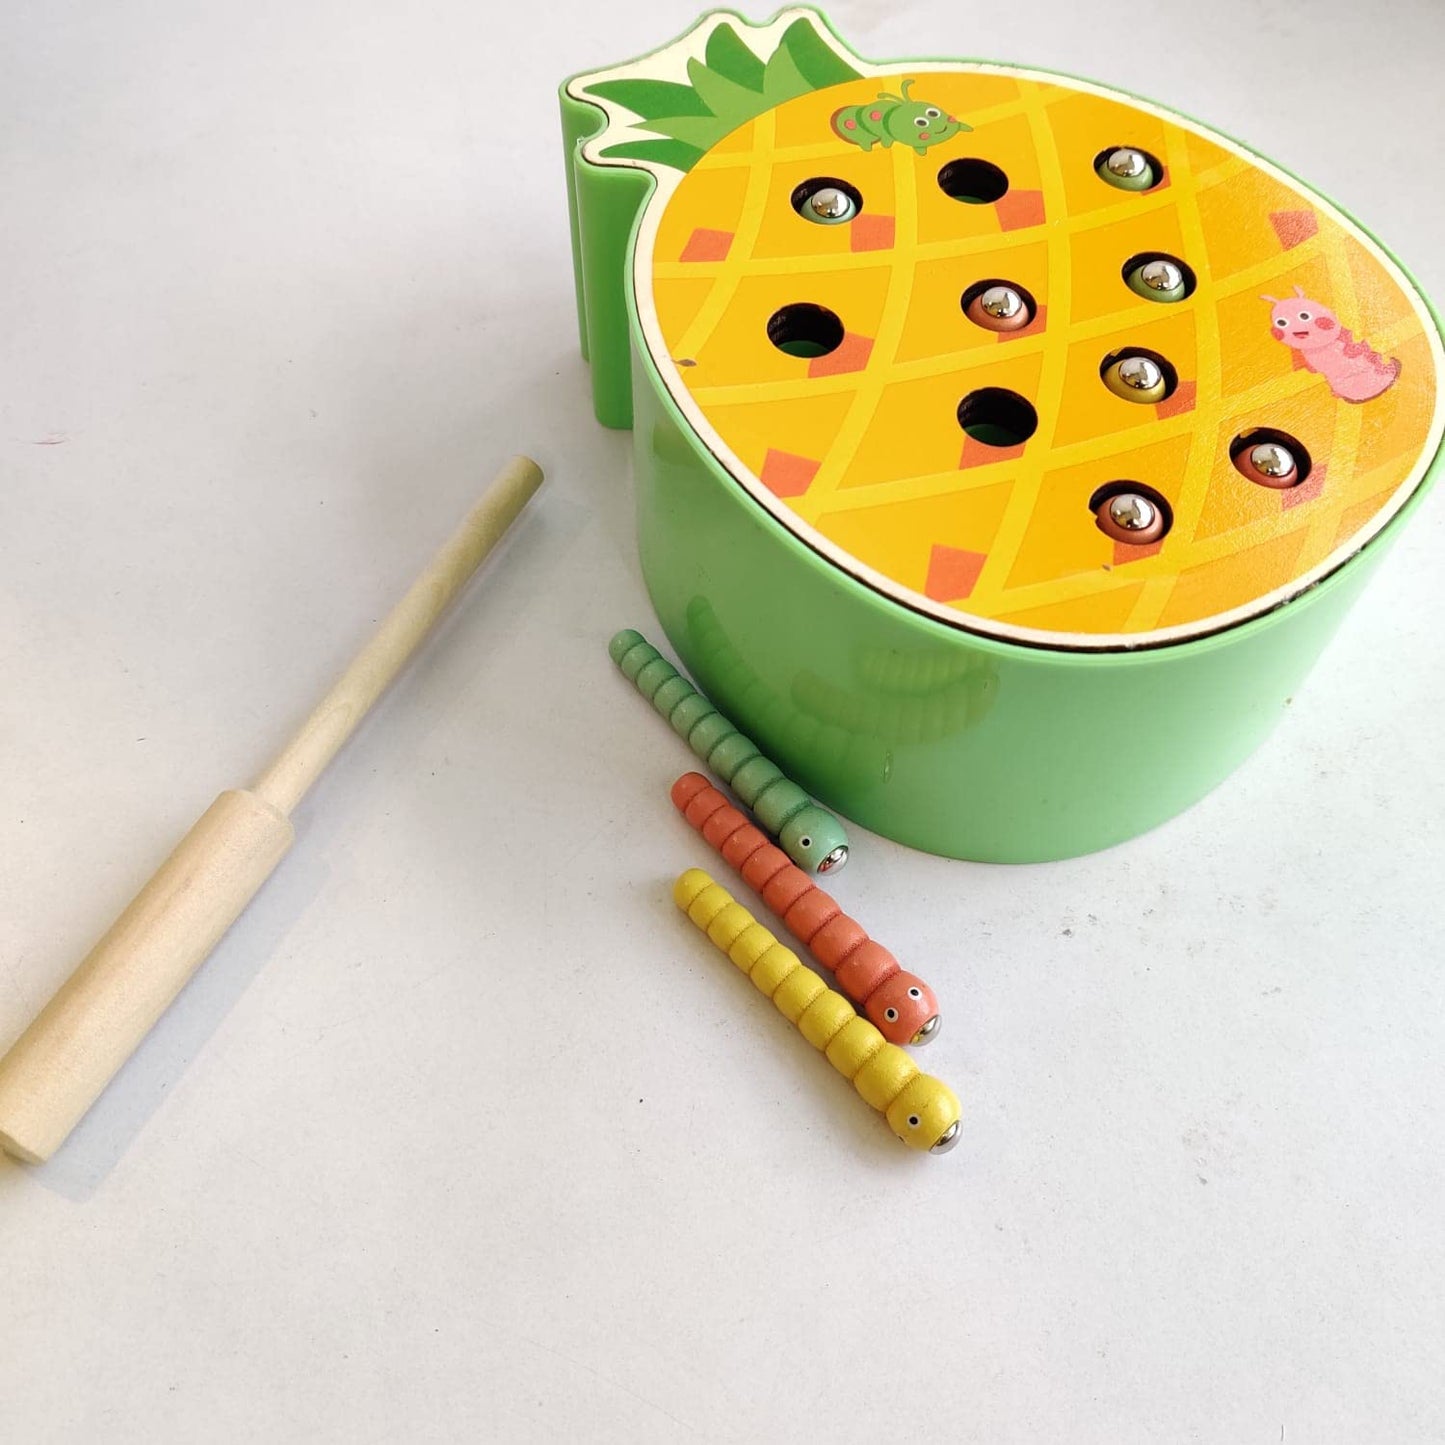 Pineapple Insect Catching Fishing Game